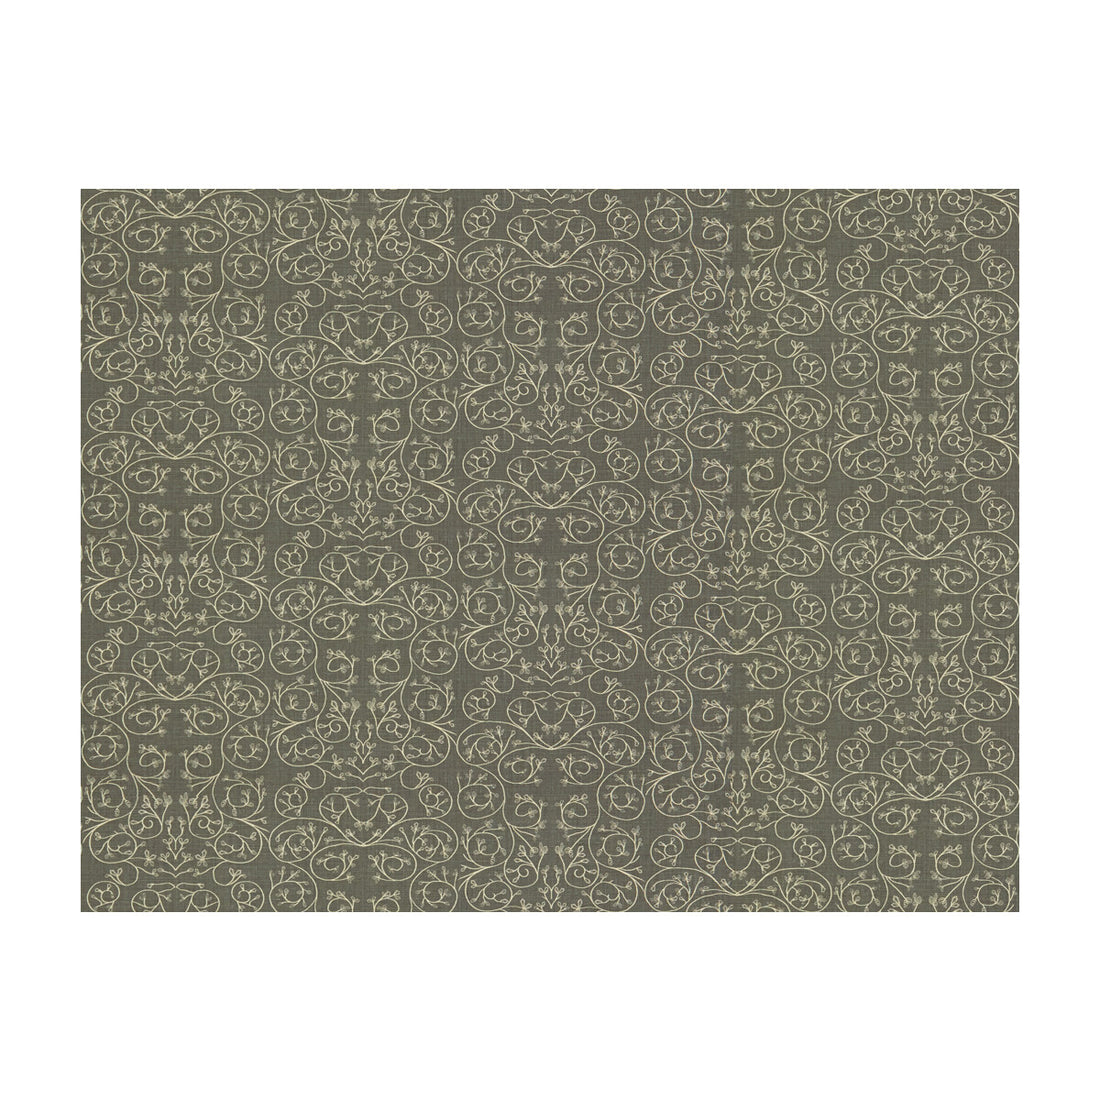 Garden Reverse fabric in metal color - pattern GWF-3512.11.0 - by Lee Jofa Modern in the Allegra Hicks Garden collection